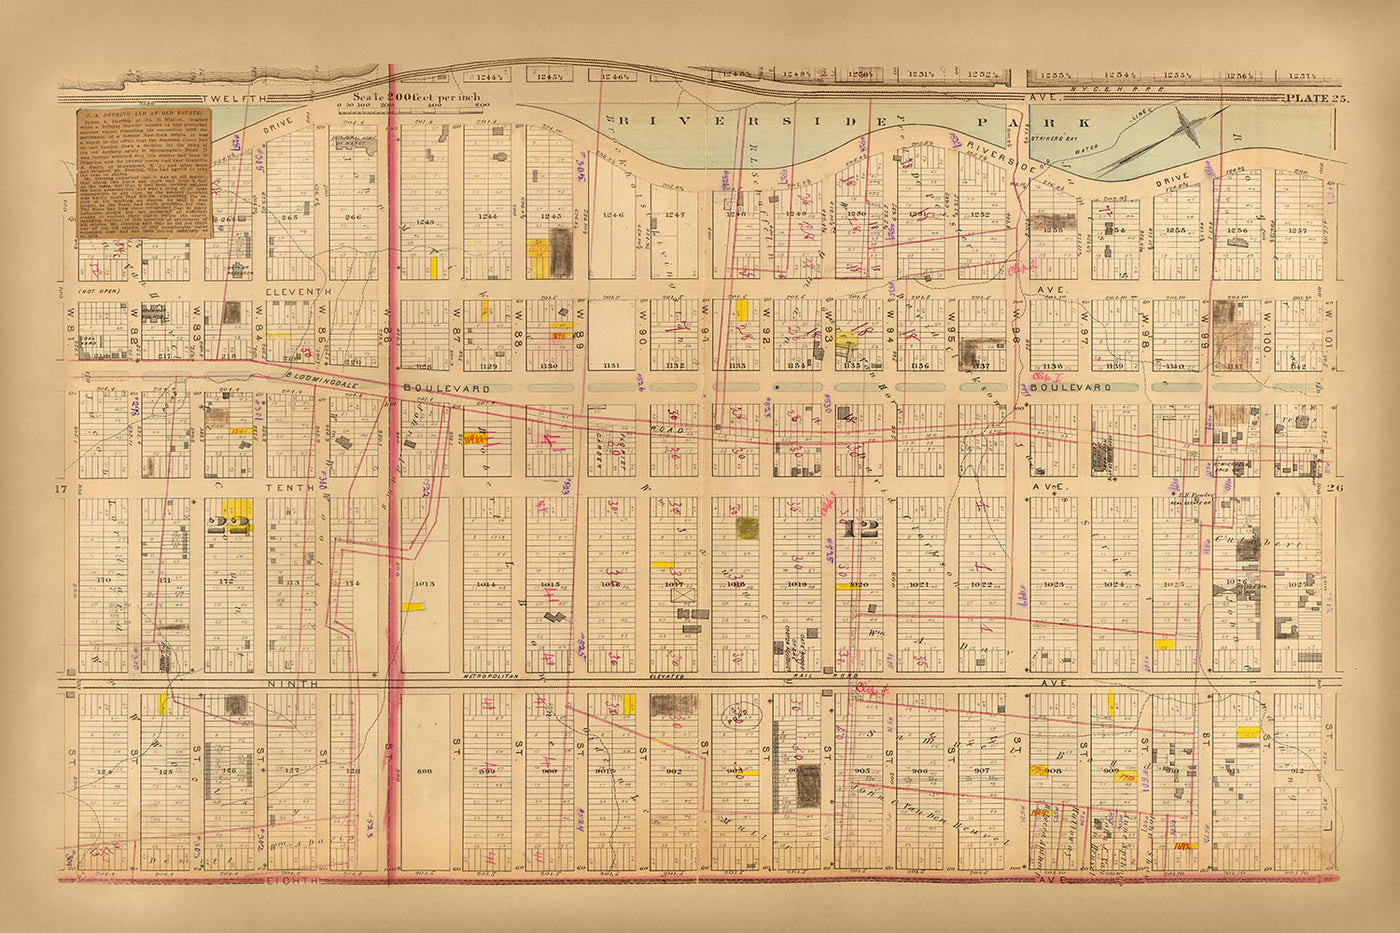 Old Map of Upper West Side, NYC, 1879: Riverside Park, West 81st to West 101st Street